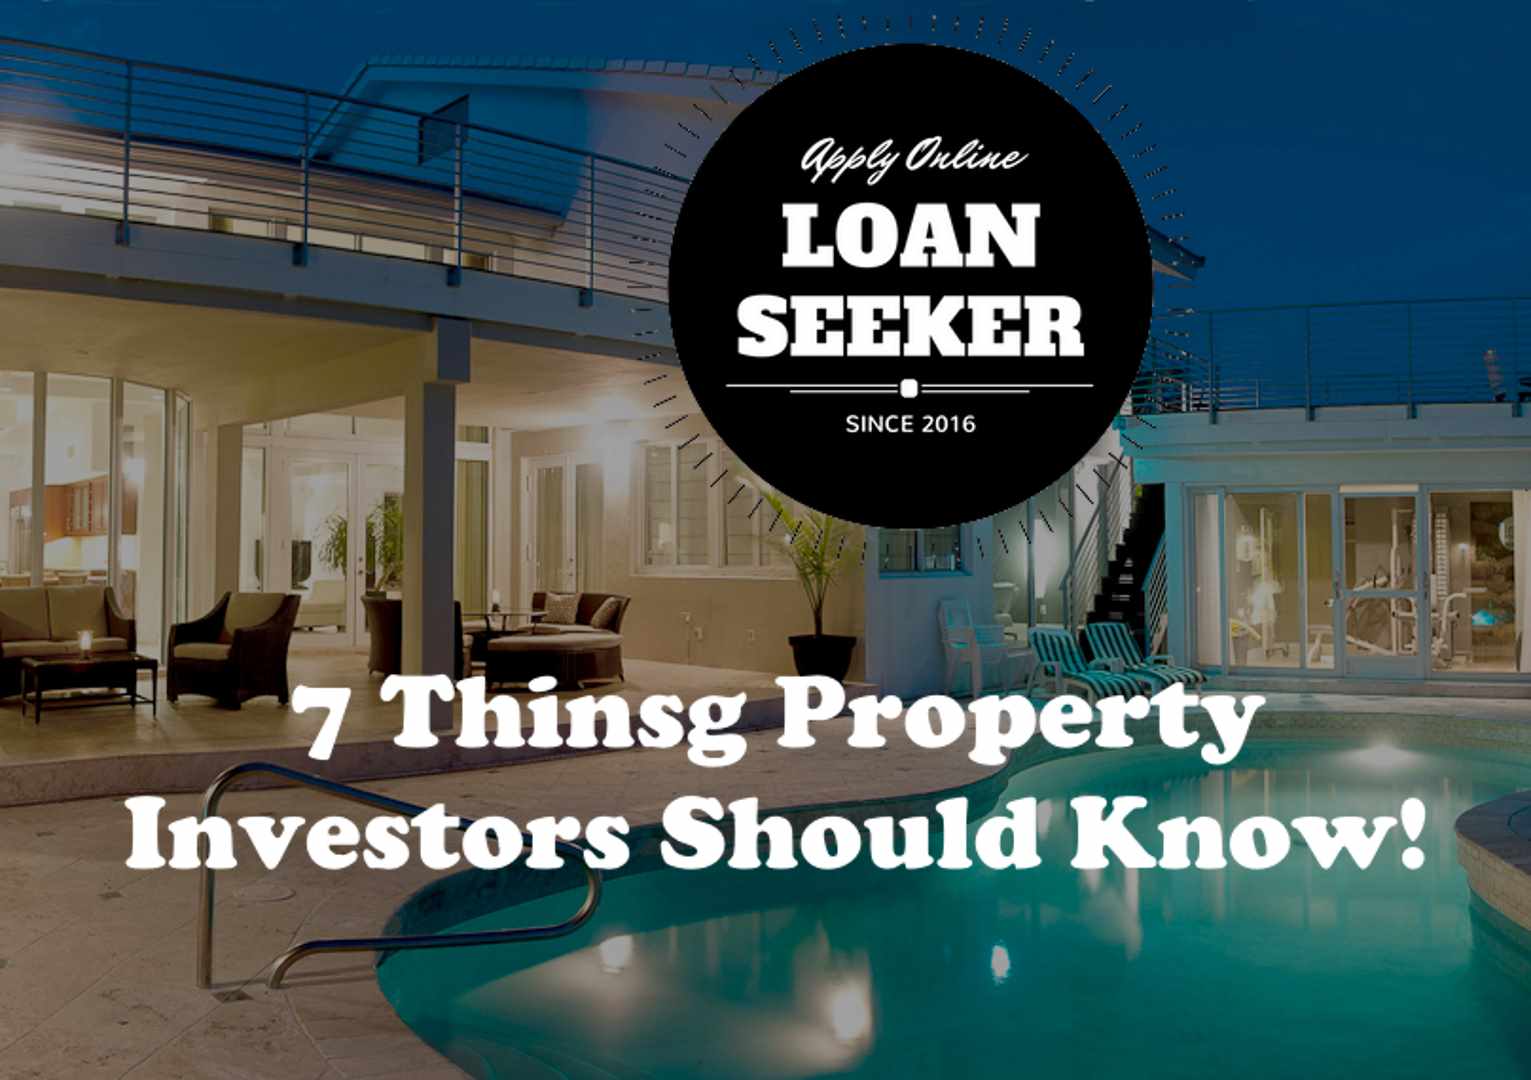 Loanseeker 7 thing property investors should know